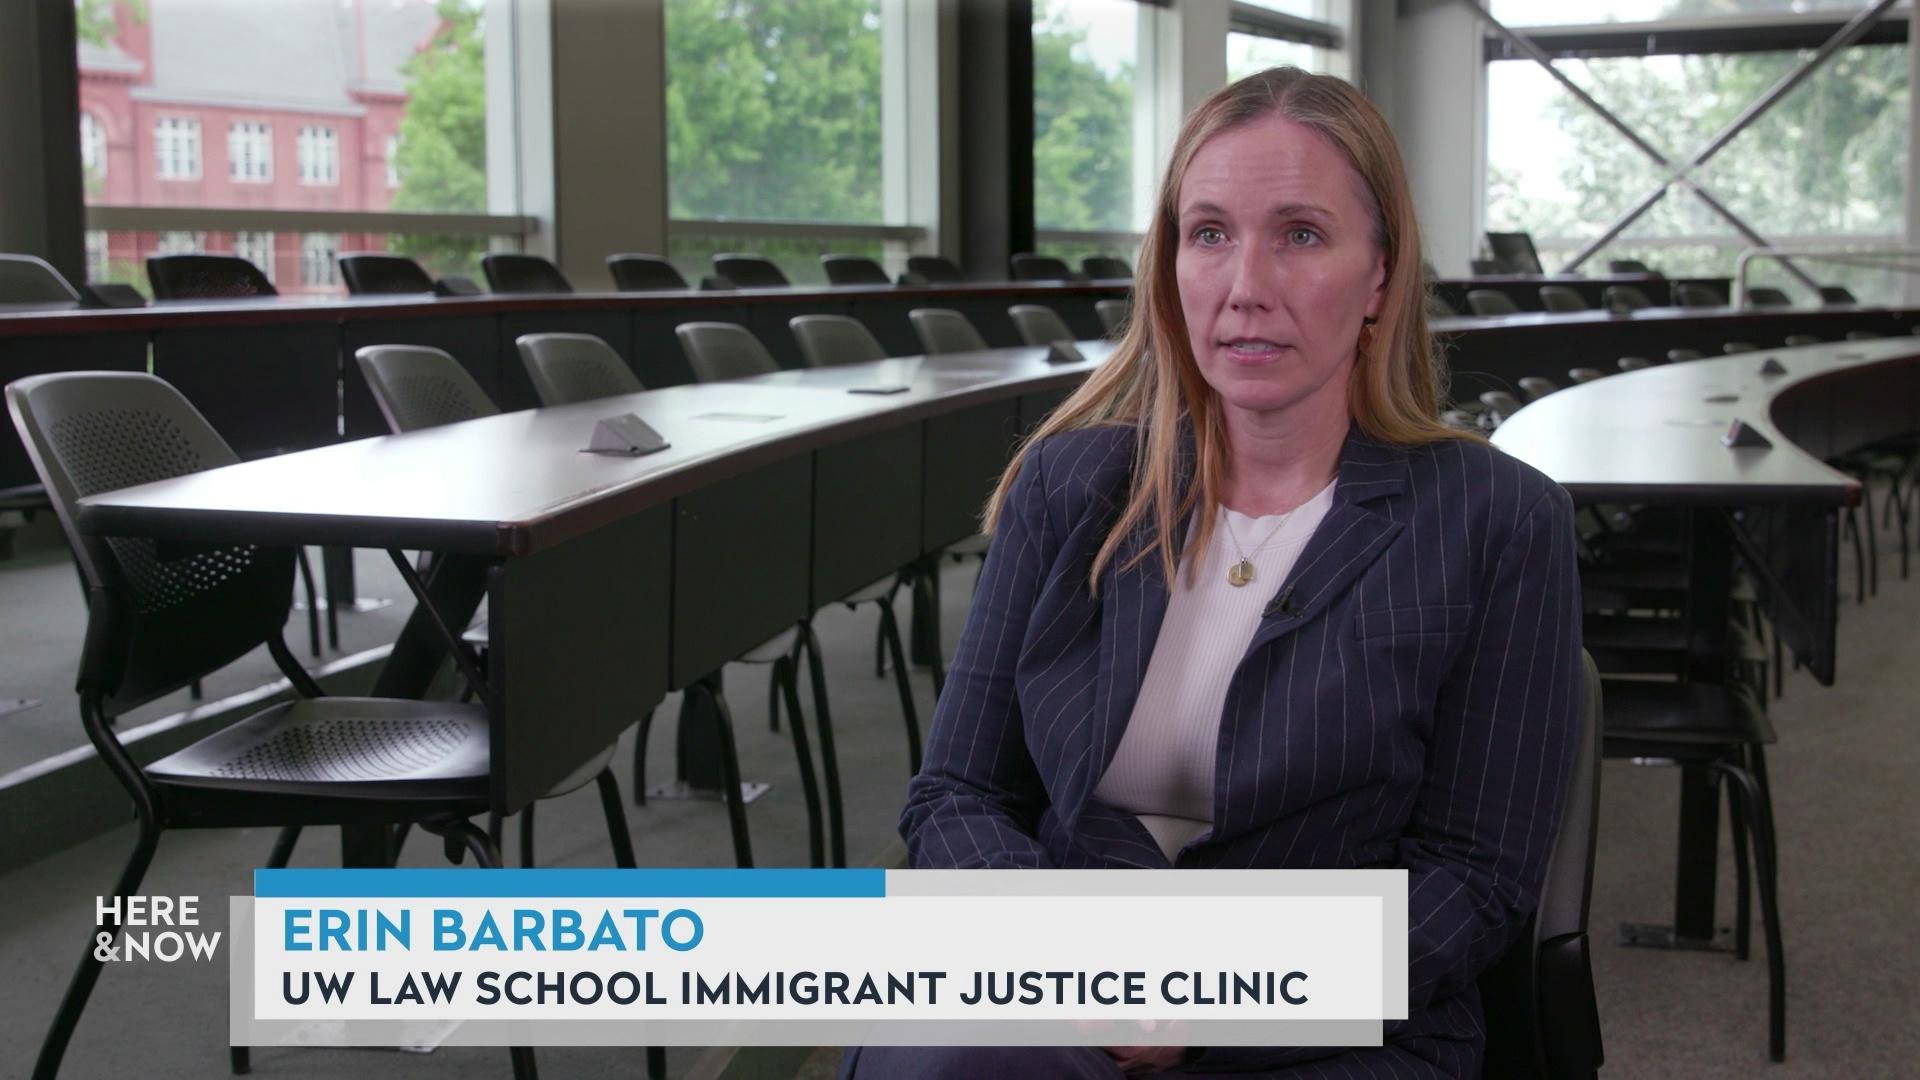 A still image shows Erin Barbato seated in front of a classroom with a graphic at bottom reading 'Erin Barbato' and 'UW Law School Immigrant Justice Clinic.'